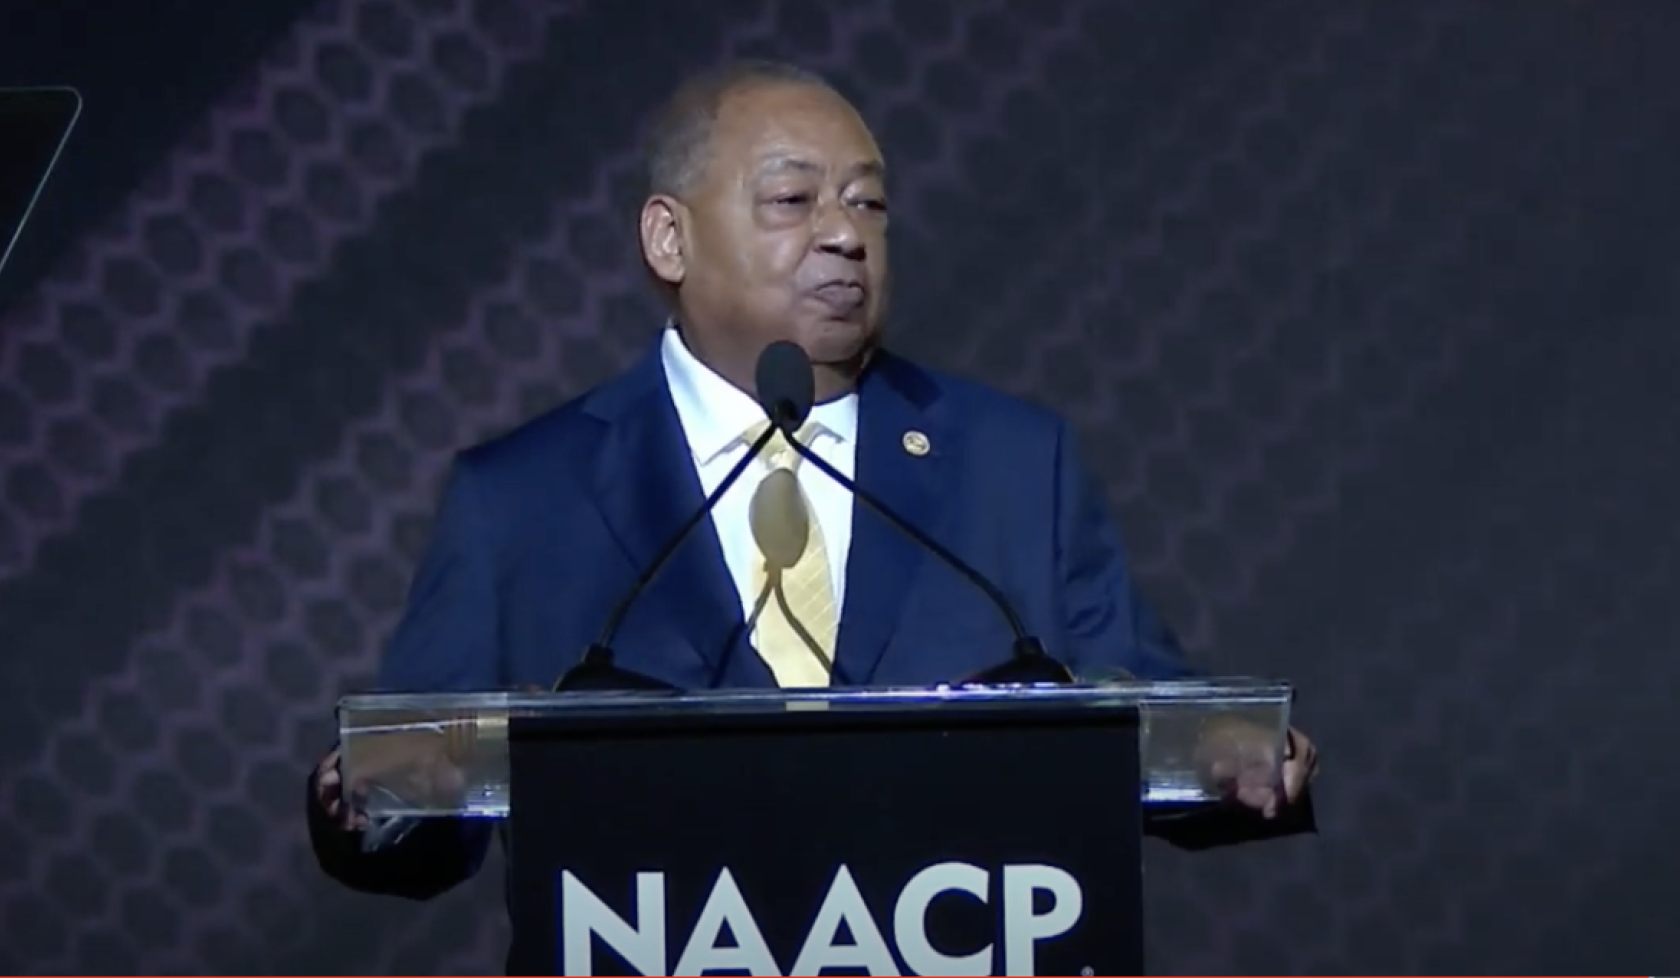 Opening Public Mass Meeting - NAACP 113th Annual Convention - Leon W. Russell